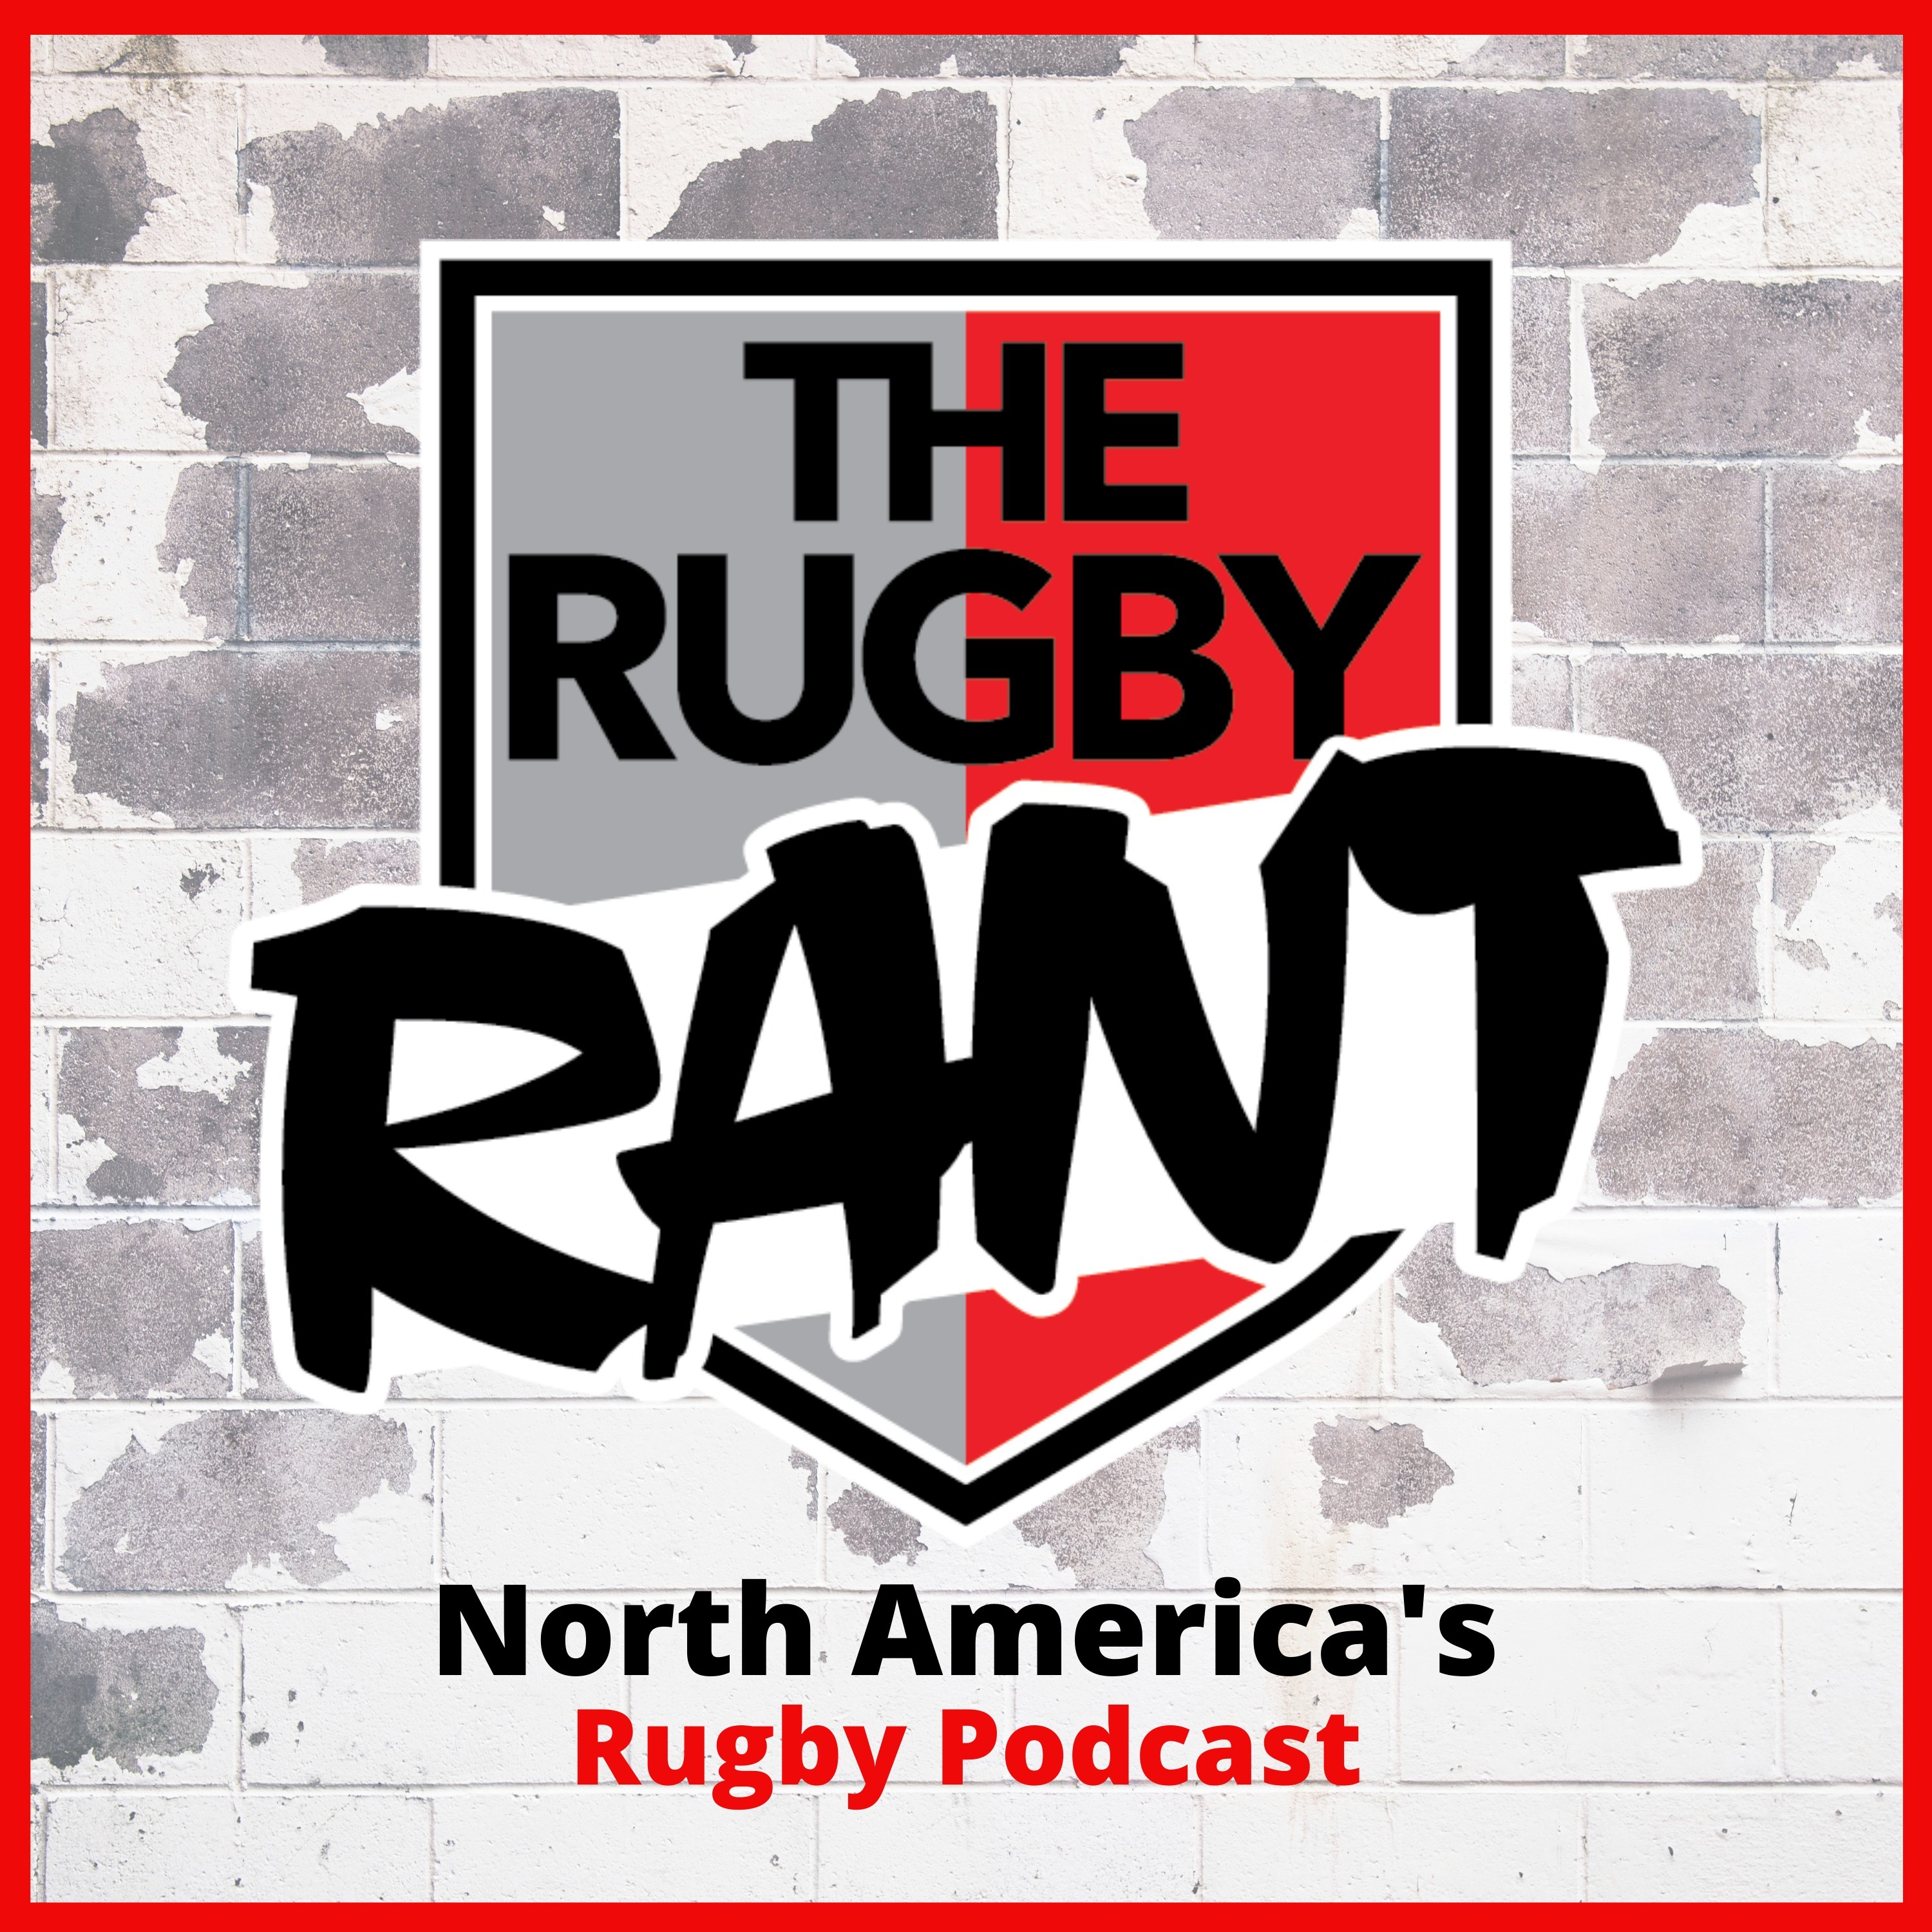 The Rugby Rant - Run, Pass or Kick with Scott Green